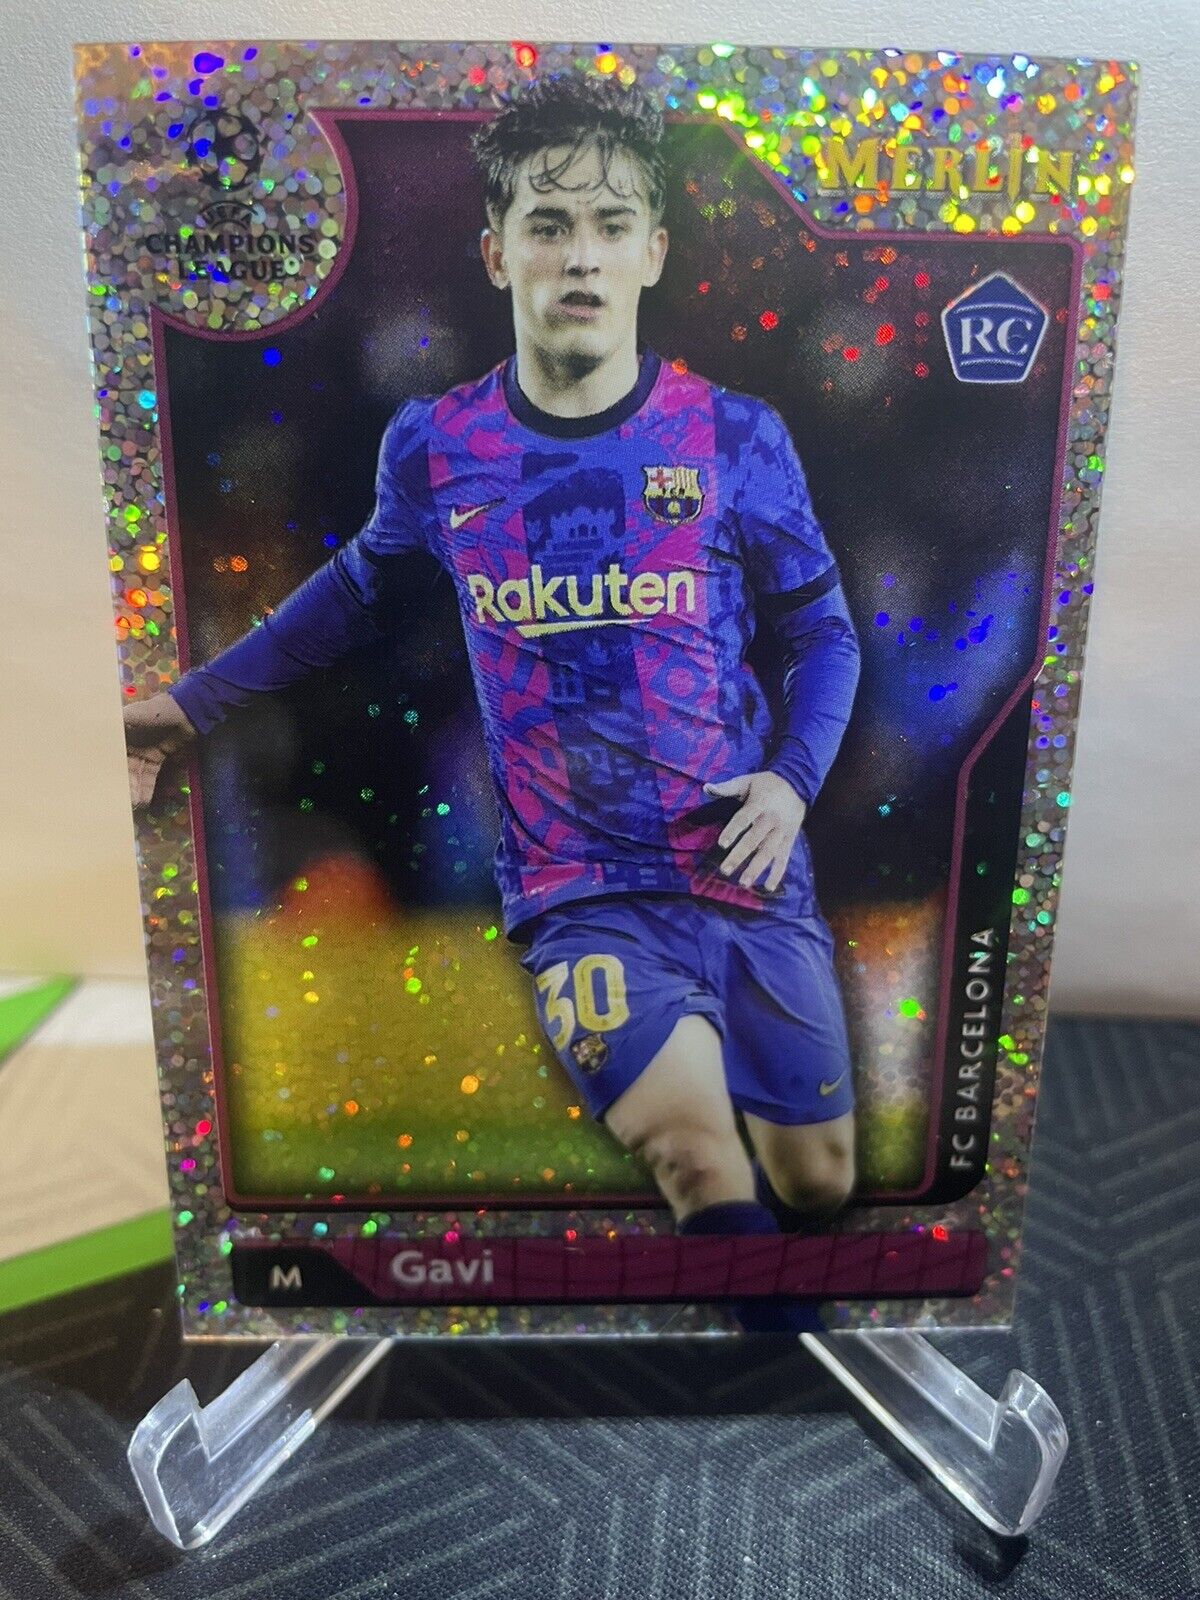 2021-22 Topps Merlin Chrome UCL Gavi RC Rookie Speckle 30/150 Jersey #